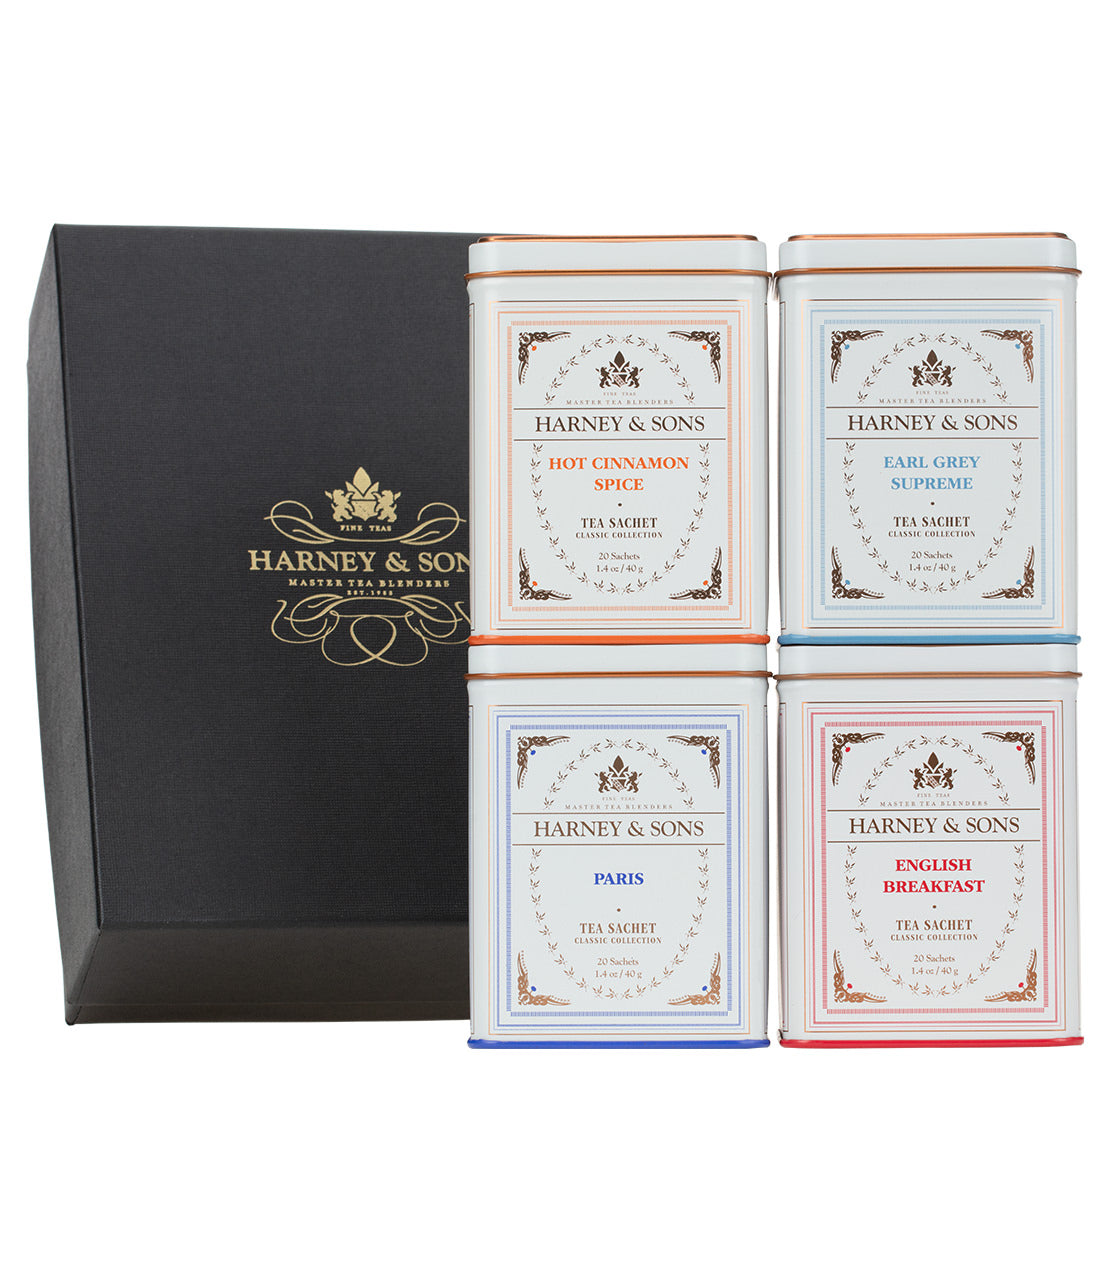 Harney & Sons Best Sellers - 20 Count Sachets - Sachets Harney & Sons Best Sellers Set - Harney & Sons Fine Teas